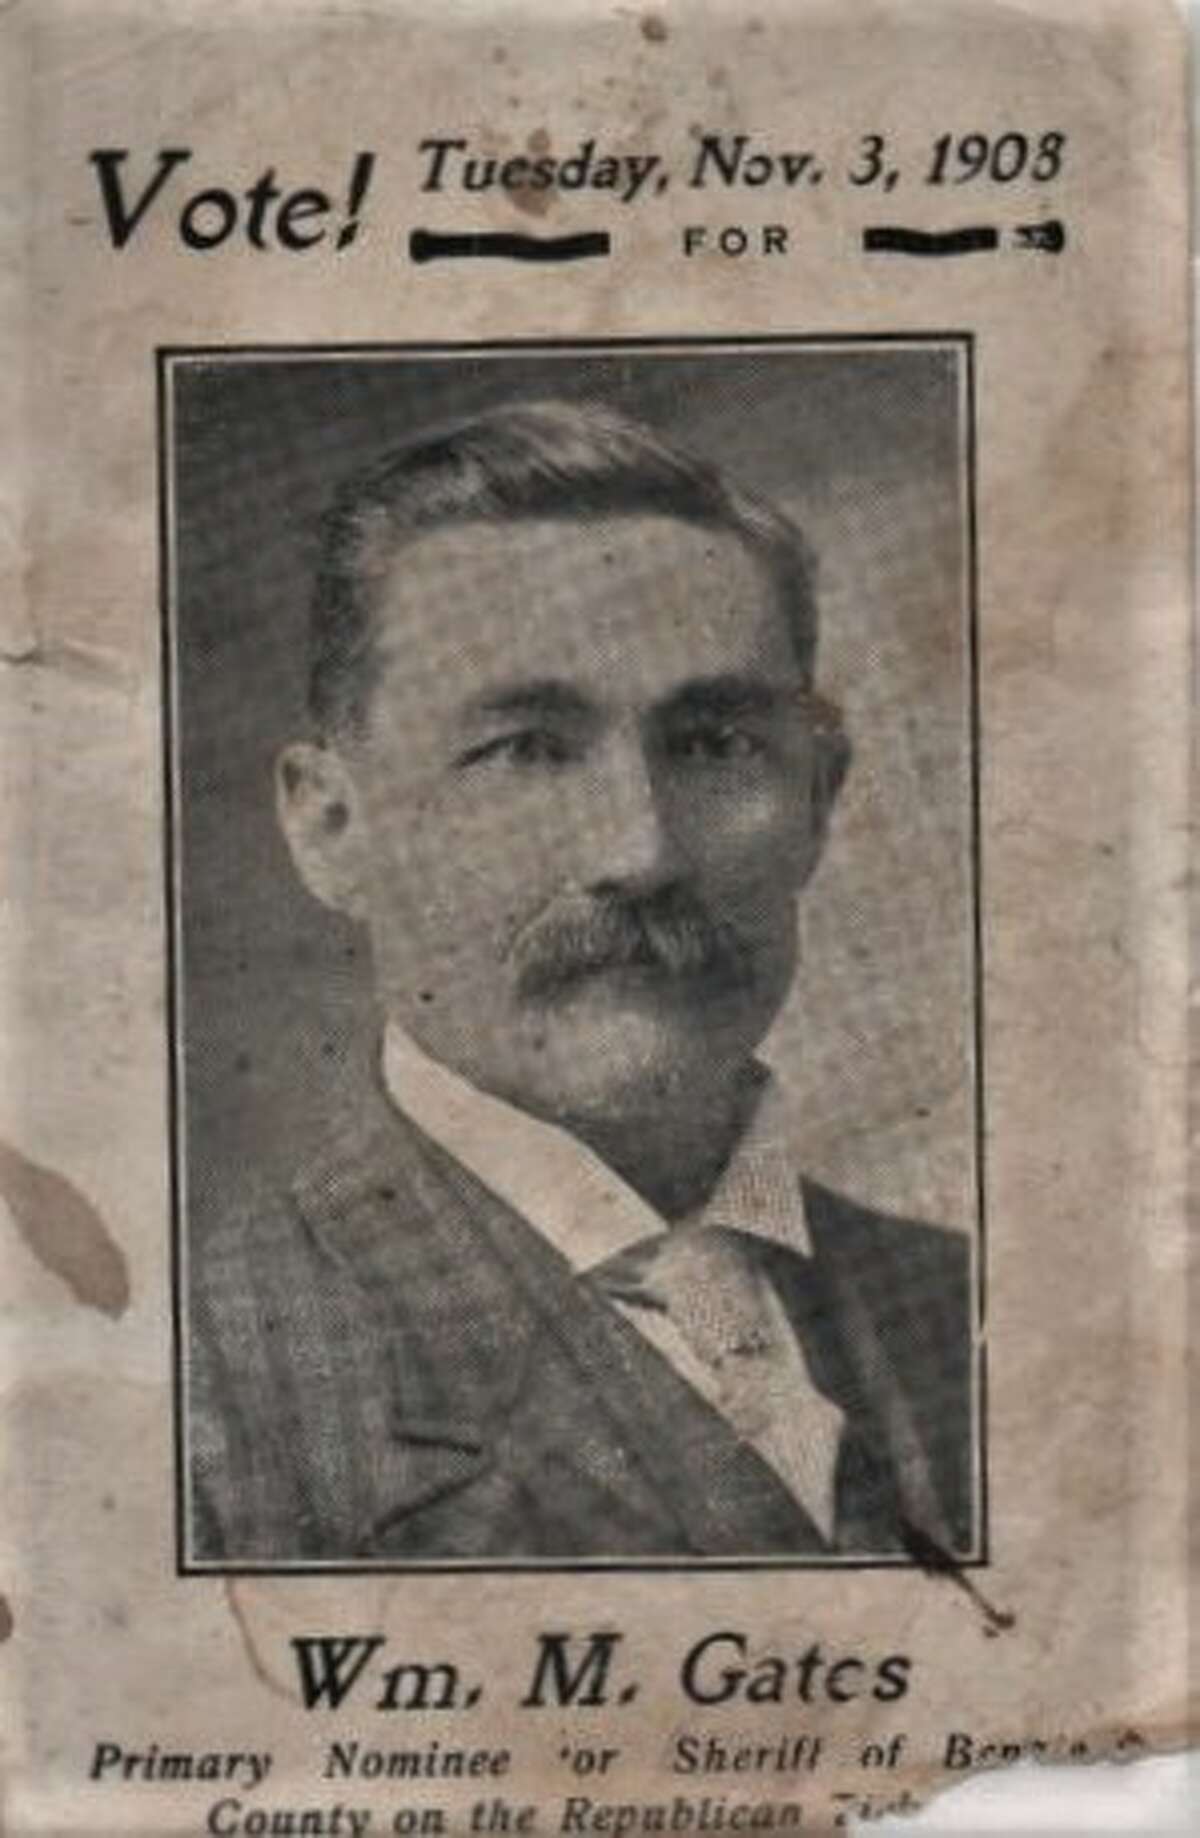 Political ad for William Gates in 1903. He won and served as sheriff of Benzie county until 1920, when he was succeeded by his wife as sheriff.